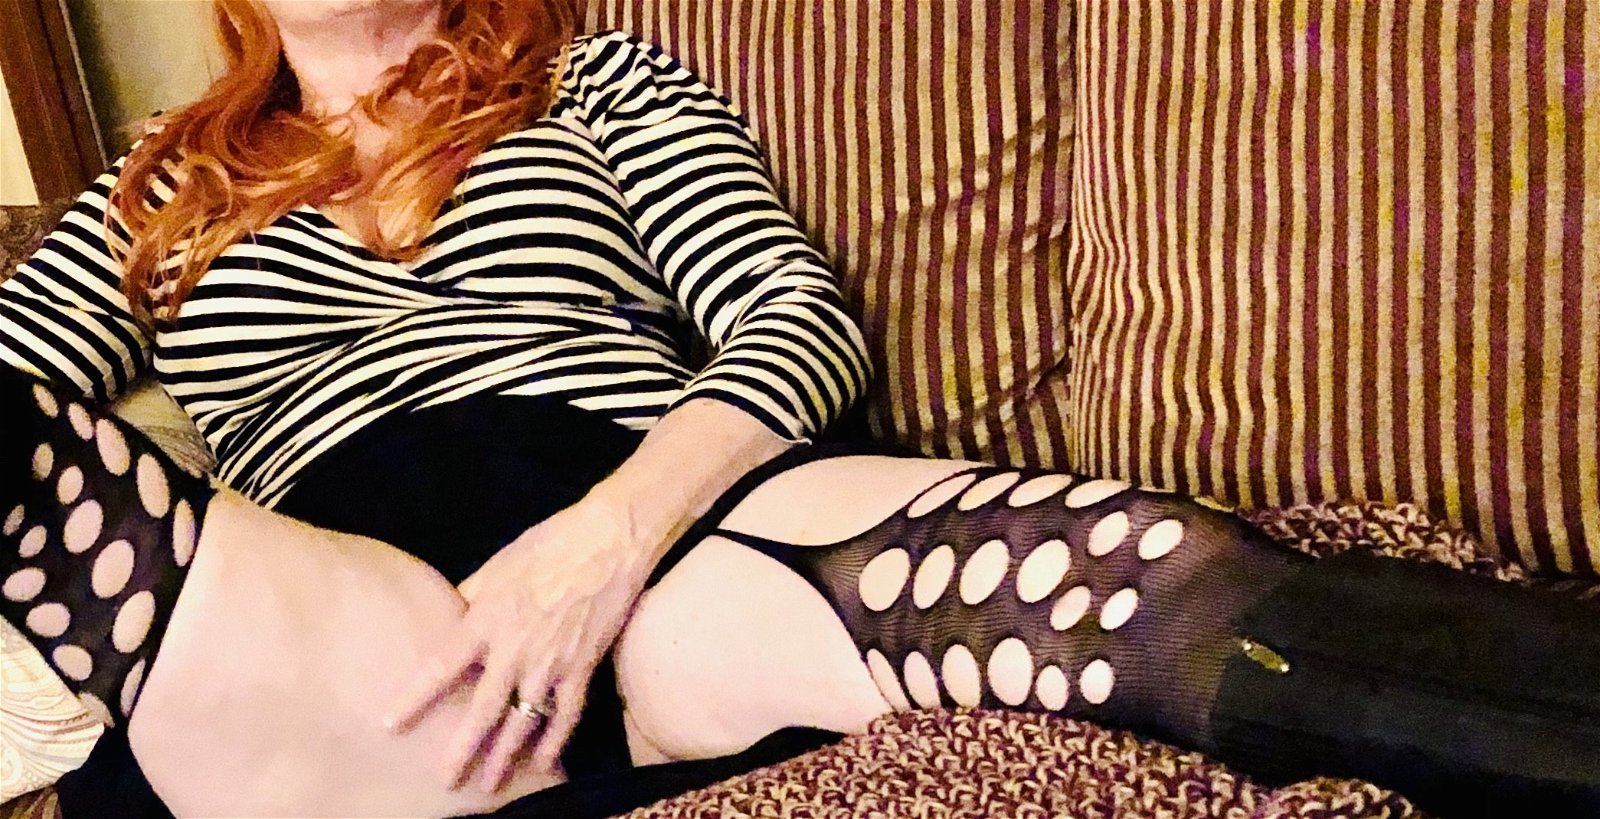 Watch the Photo by RedHead Hotwife with the username @RubyRedHeadHotwife, posted on November 9, 2020. The post is about the topic MILF. and the text says 'let me know what you think'